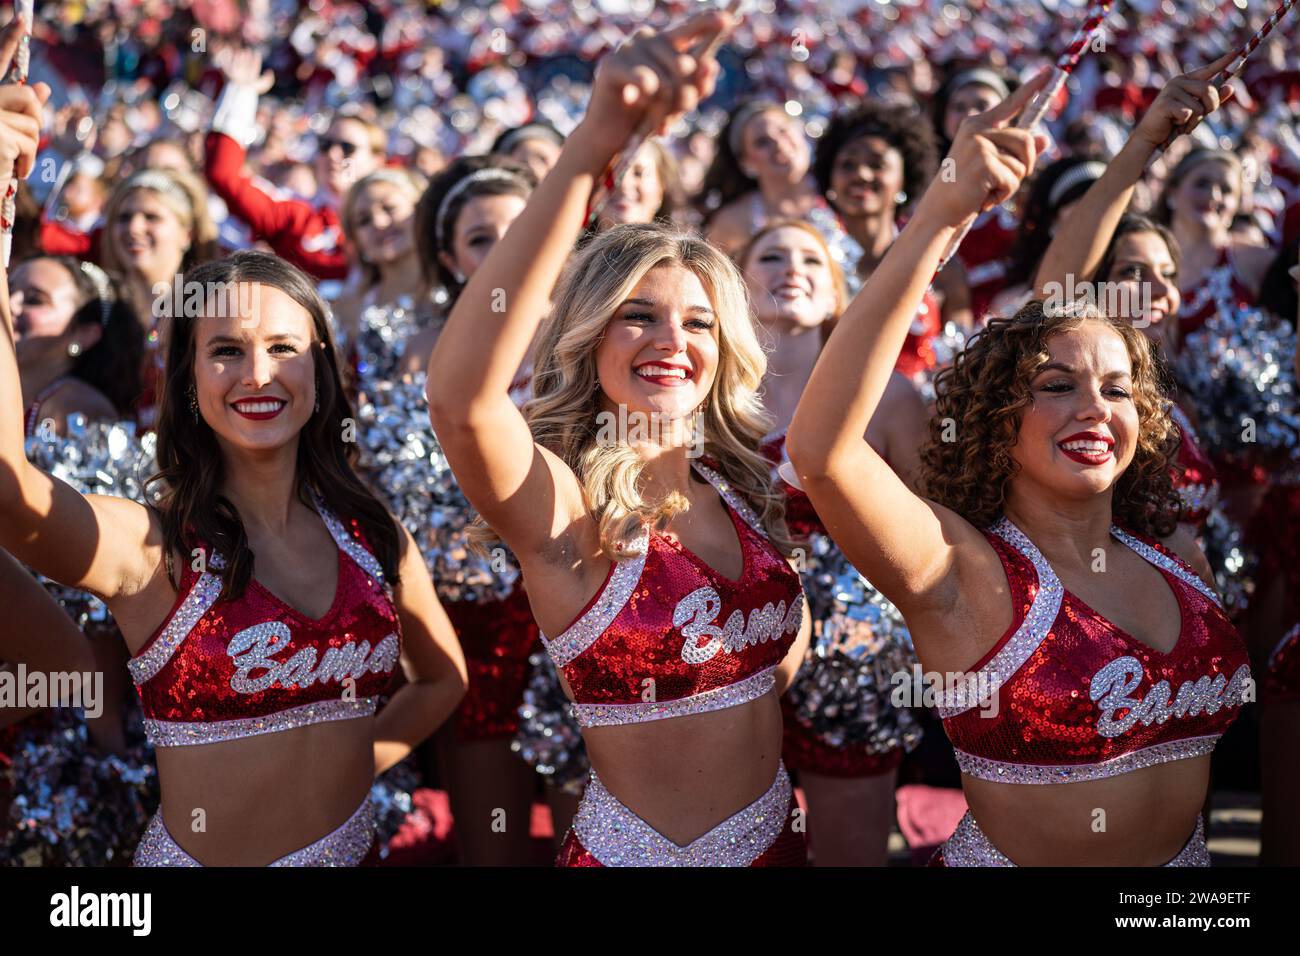 Alabama Crimson Tide dance team during the CFP Semifinal at the Rose Bowl Game between the Alabama Crimson Tide and Michigan Wolverines, Monday, Janua Stock Photo